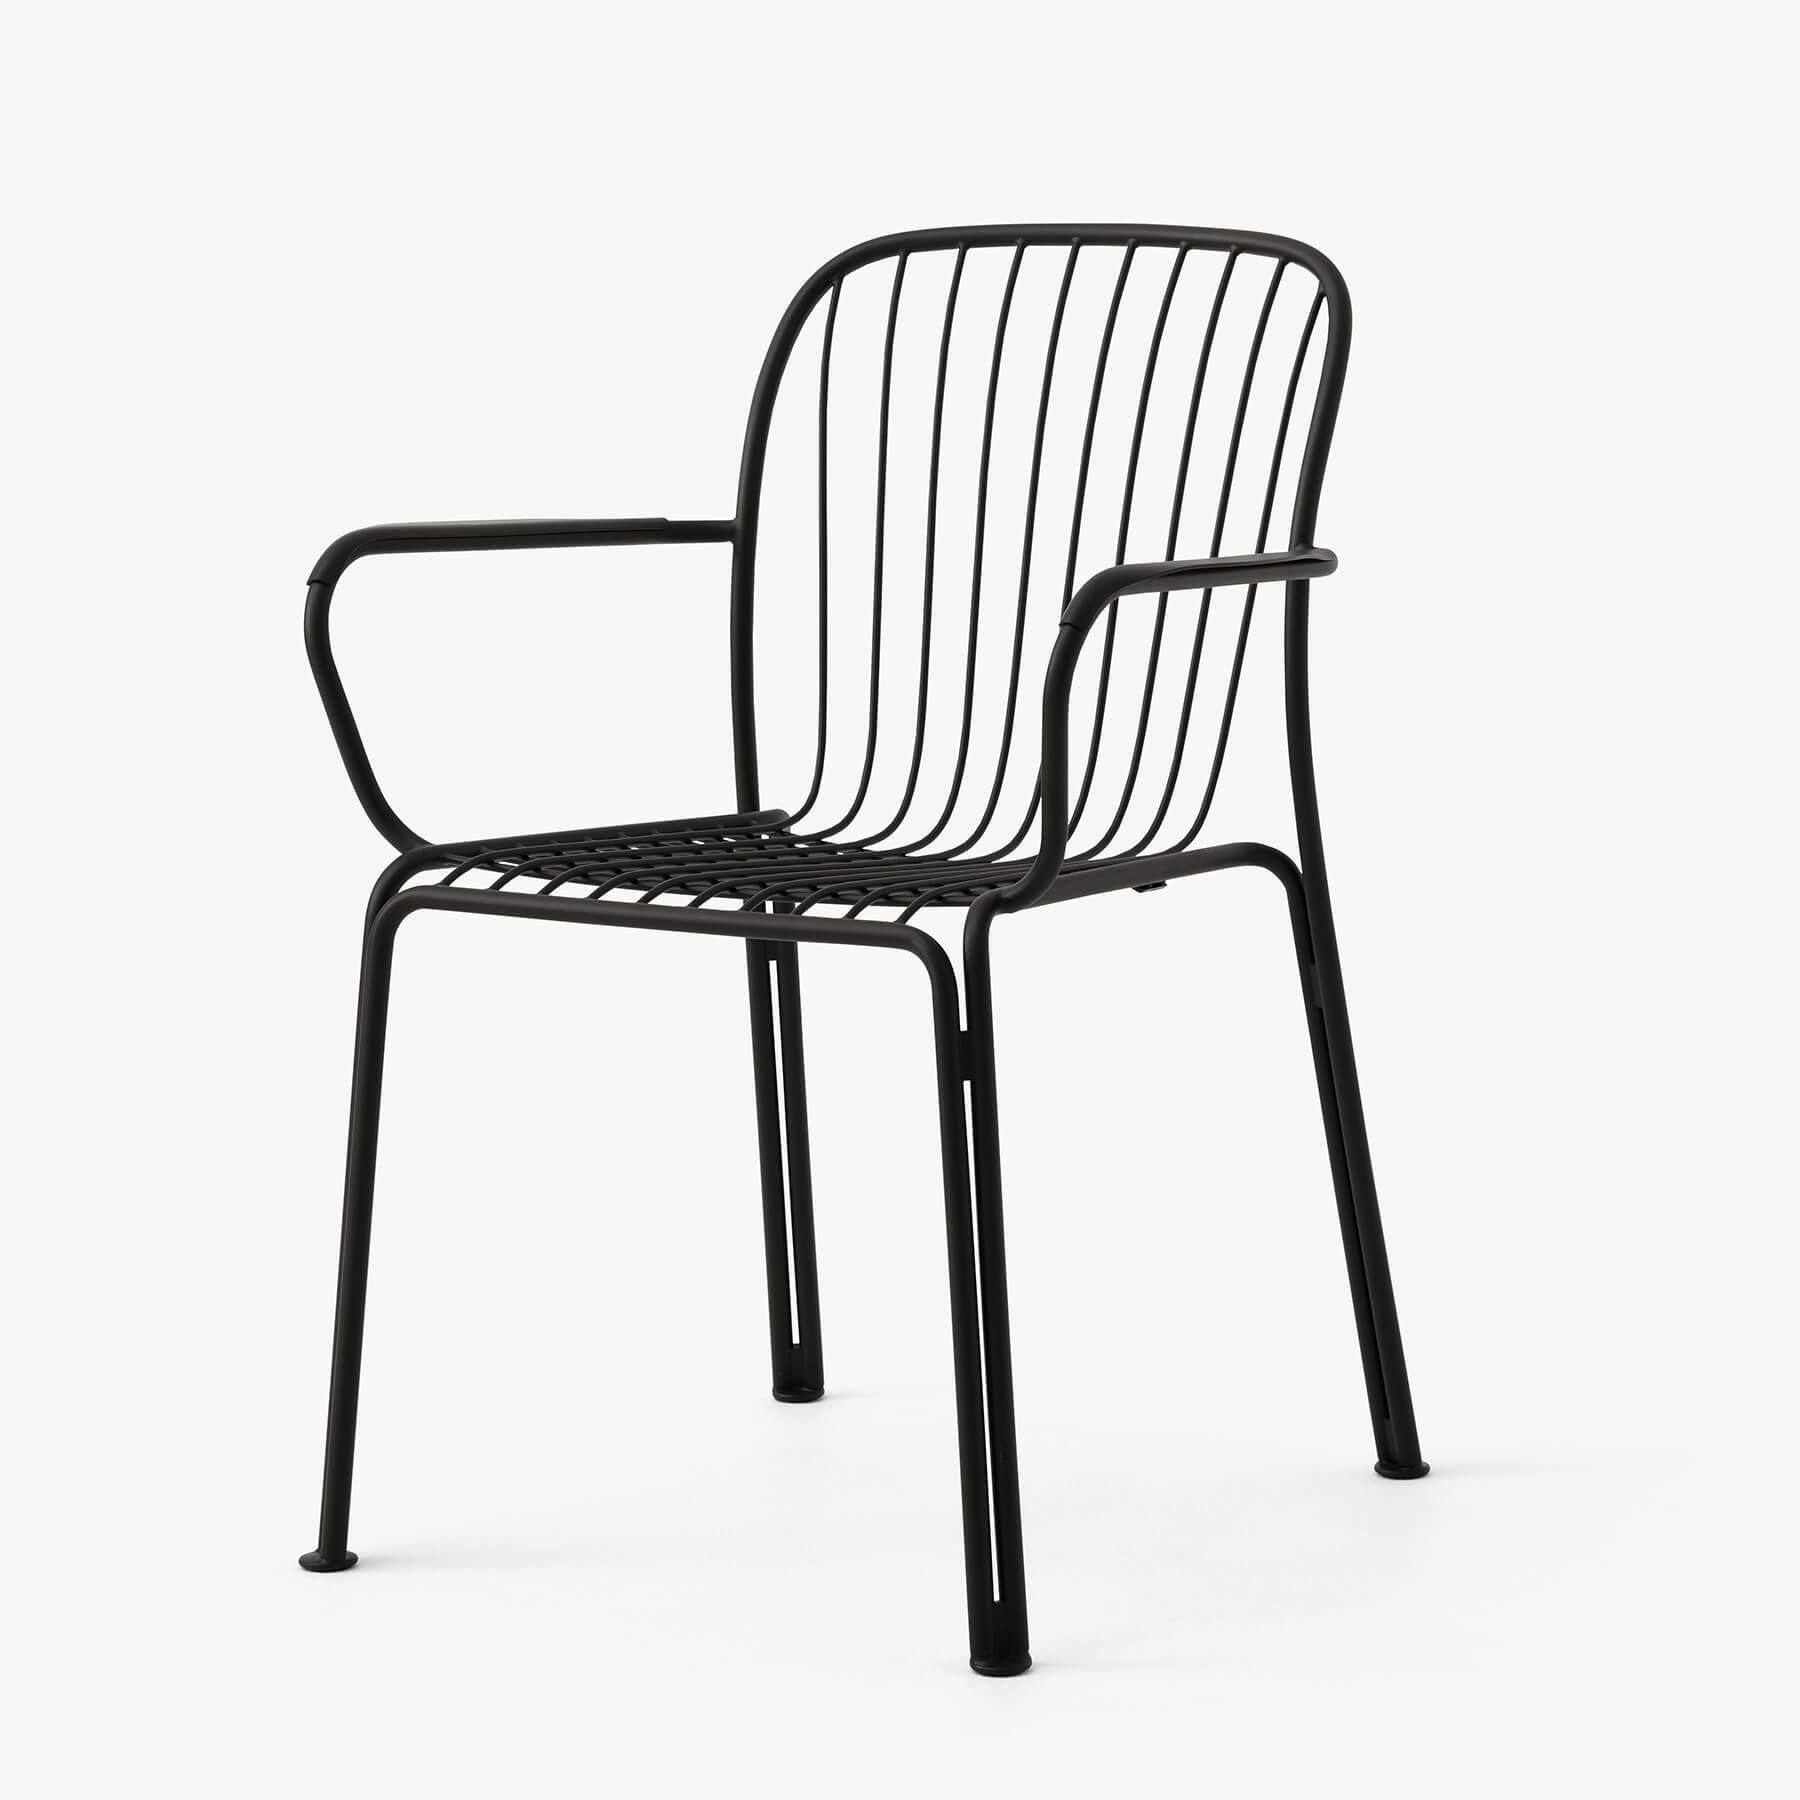 Tradition Thorvald Sc95 Outdoor Chair Warm Black